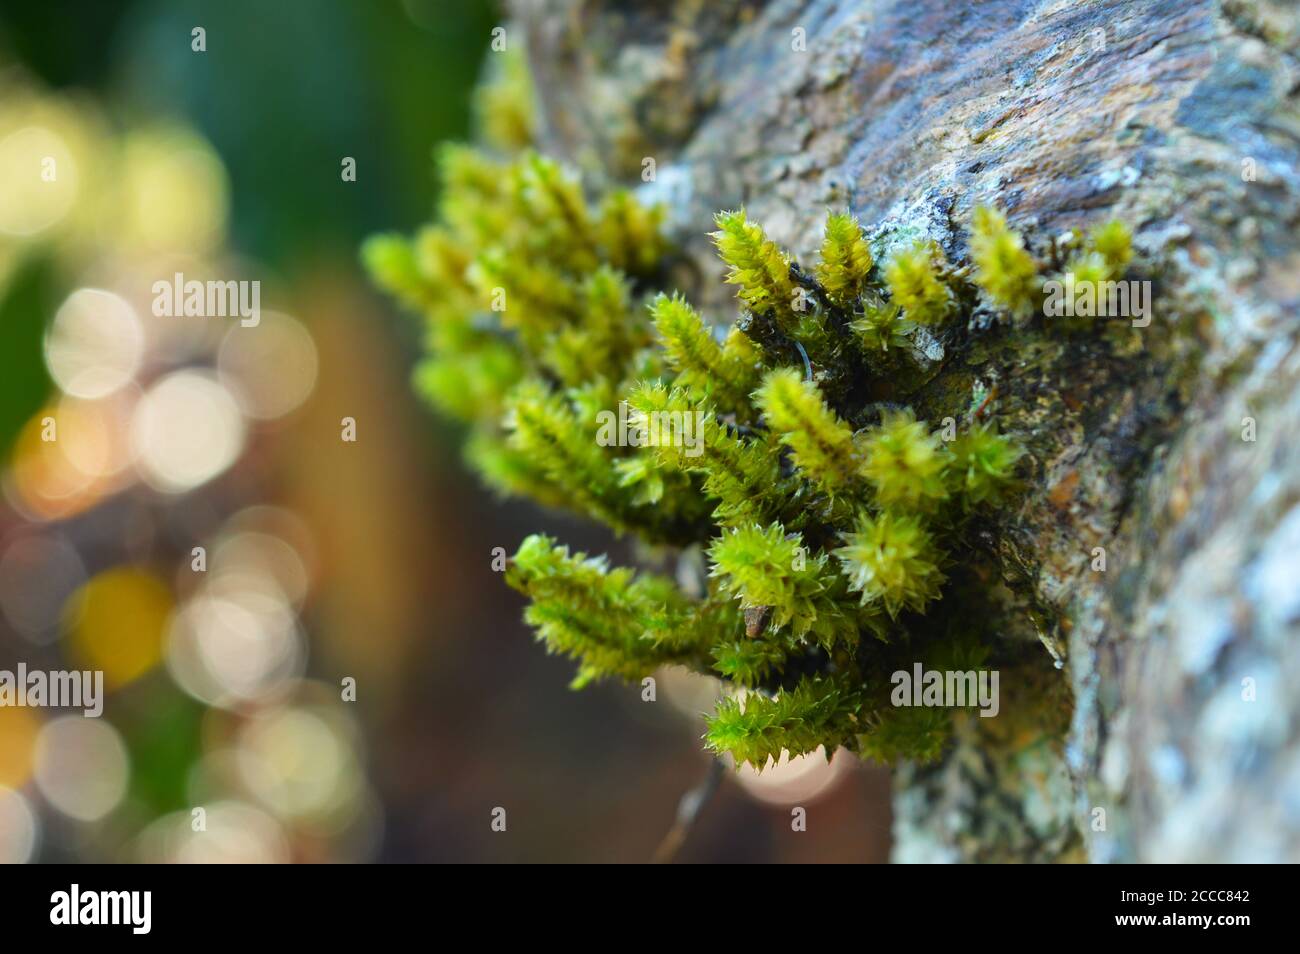 moss or Bryophyta, are small, non-vascular flowerless plants that typically form dense green clumps or mats, often in damp or shady locations. Stock Photo